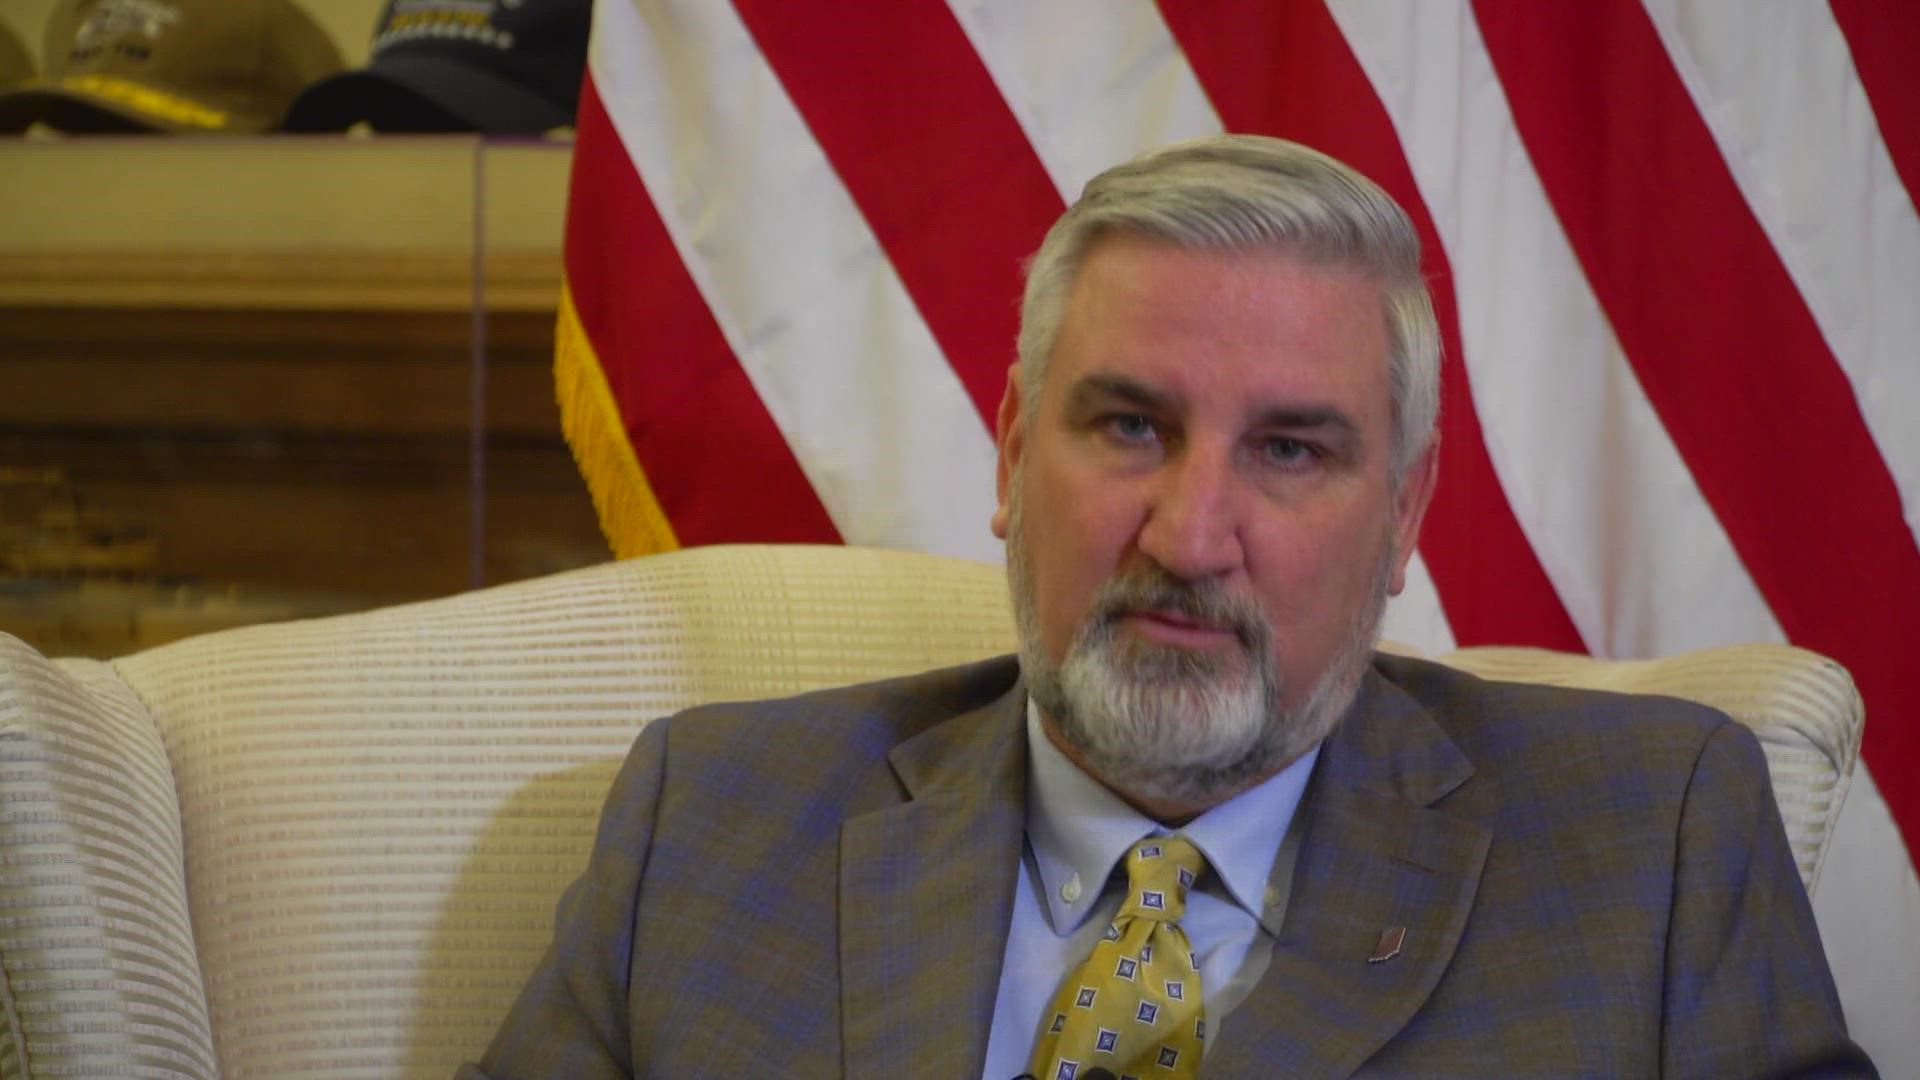 The governor is looking ahead to 2023 as the state faces challenges, but he told 13News Thursday he's not yet thinking about his own future.